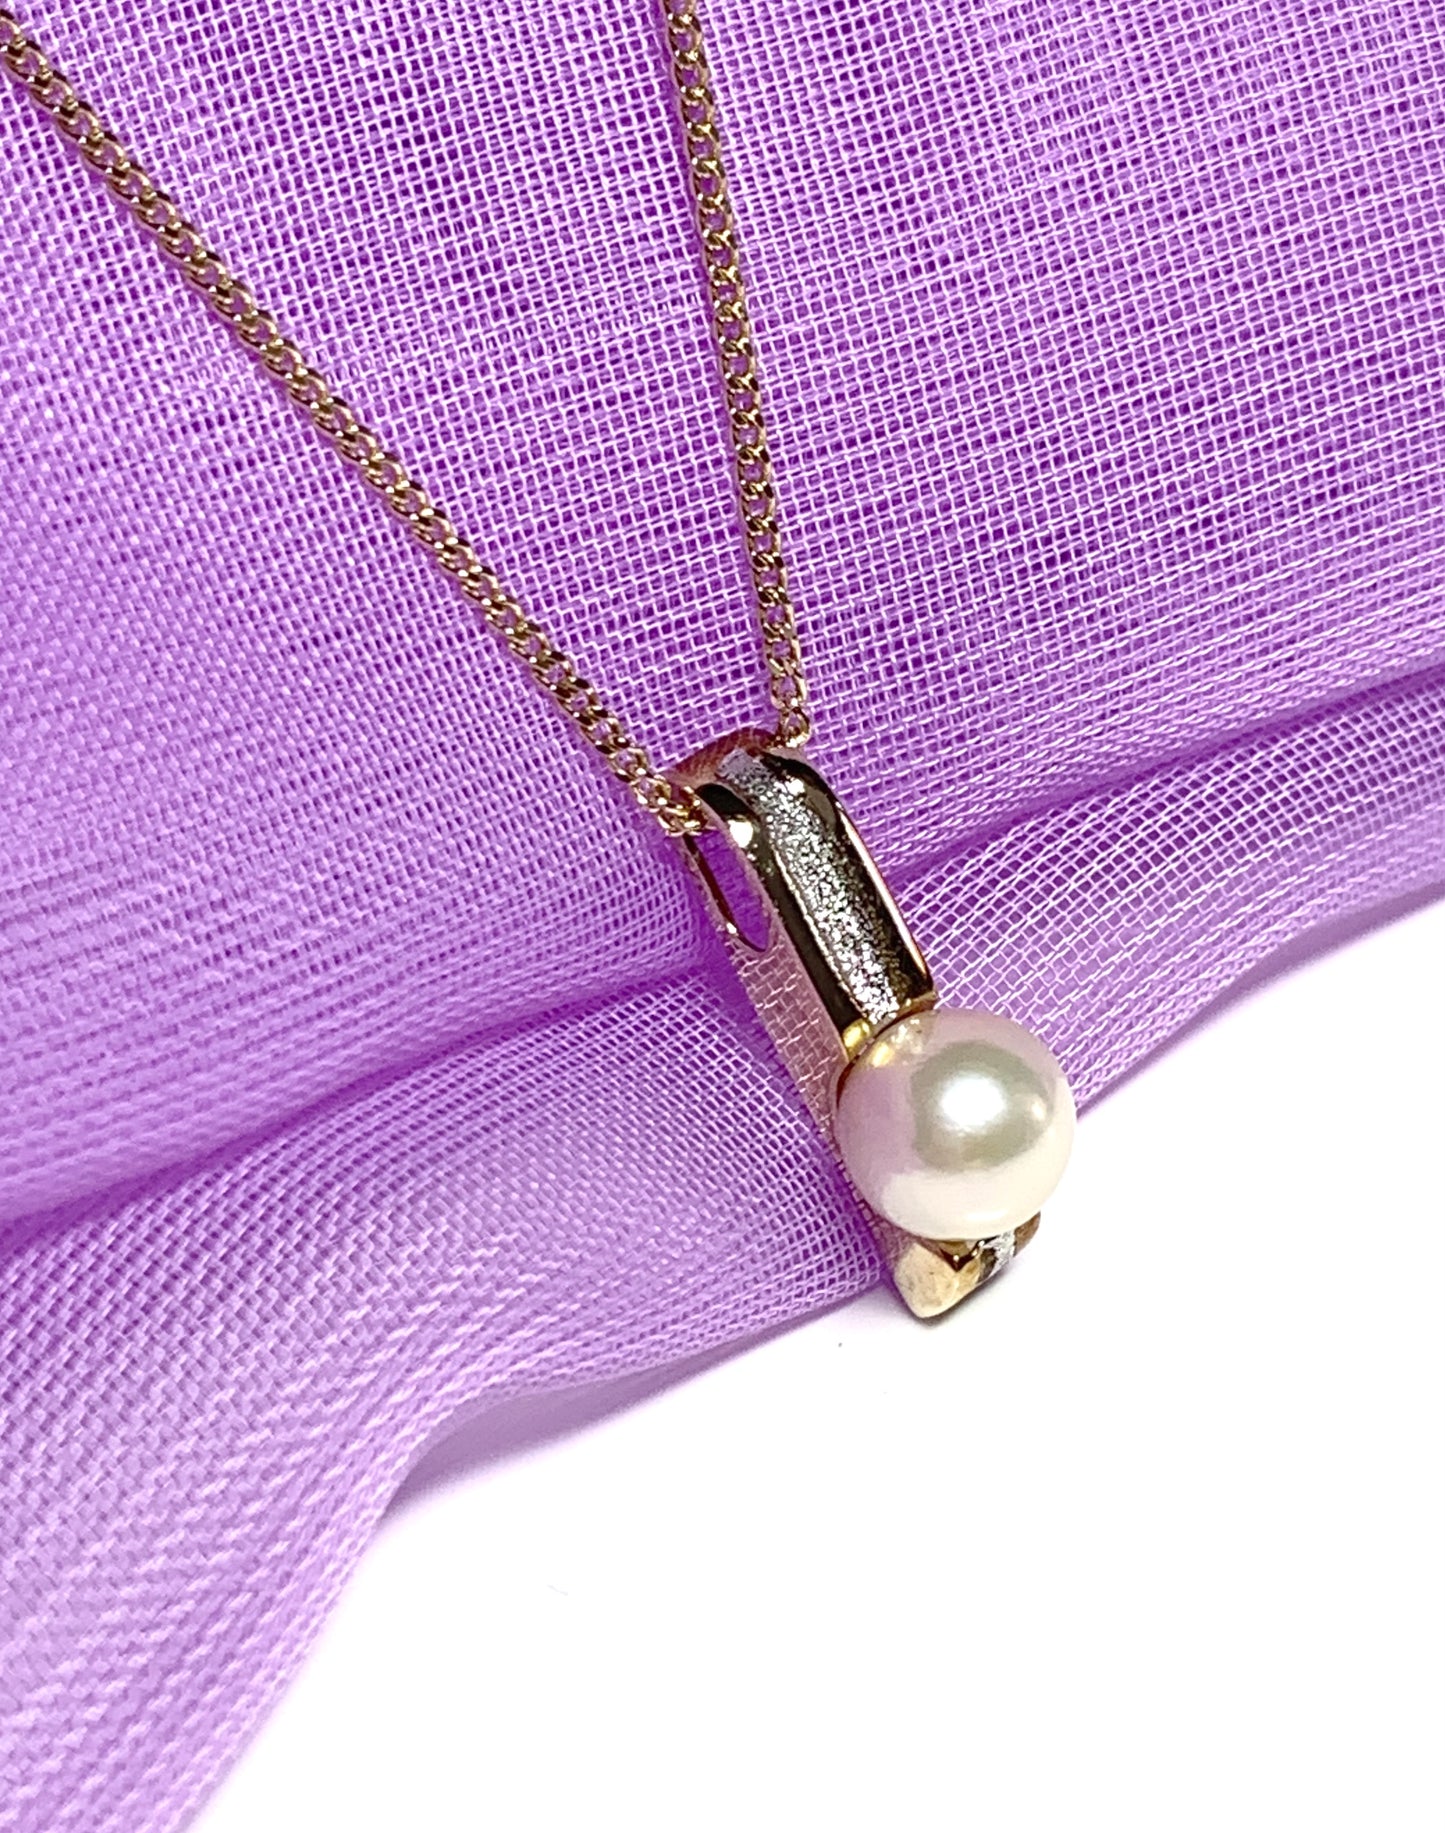 Pearl necklace two tone gold pedant